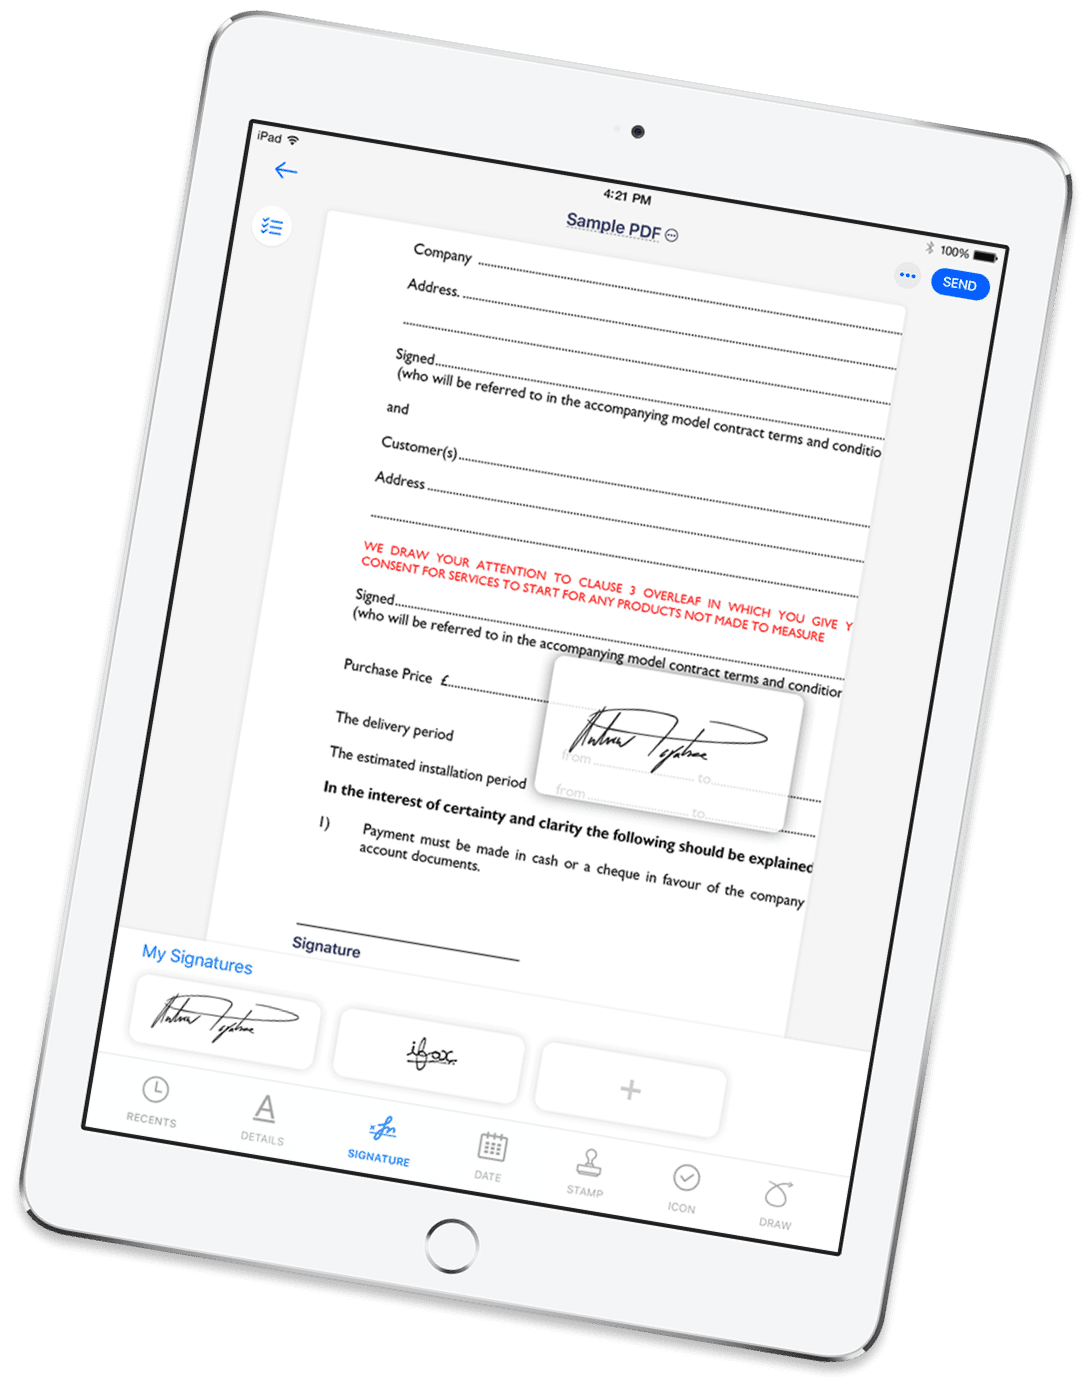 Complete your digital contract with Fill app on any device